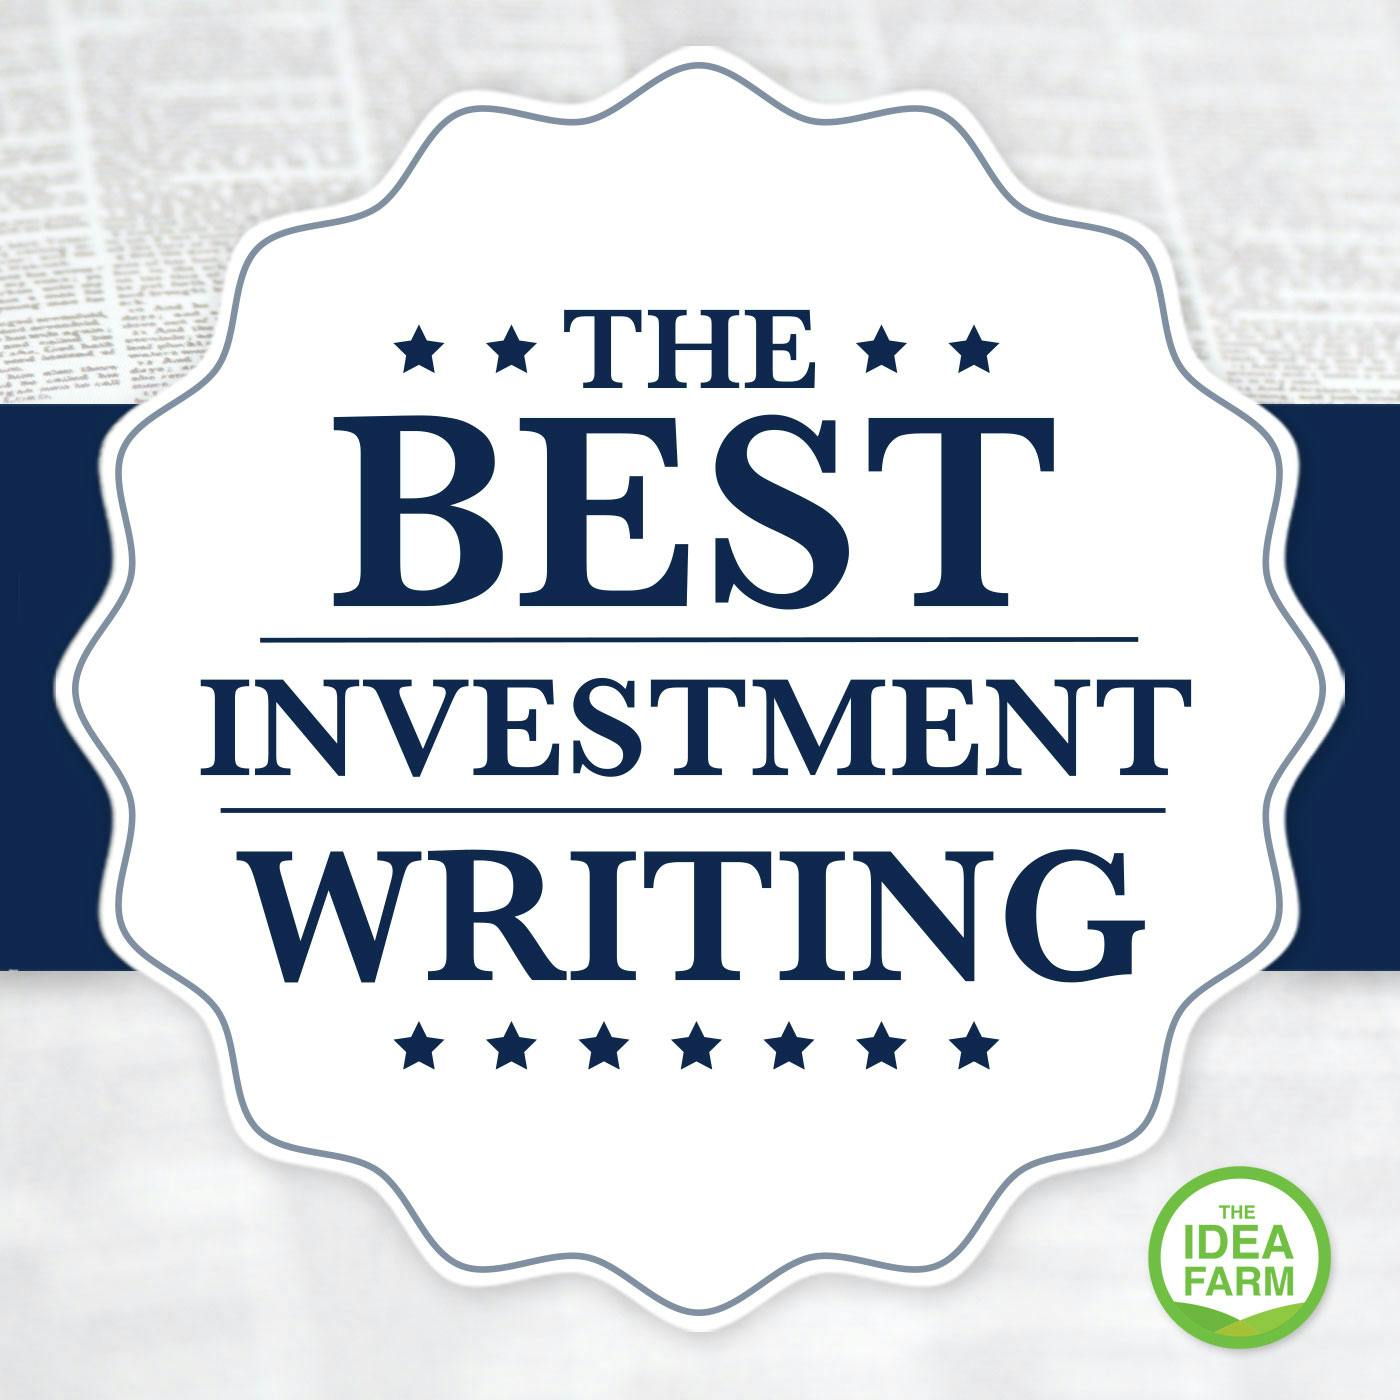 The Best Investment Writing Volume 3: Selected Writing from Prominent Investors and Authors